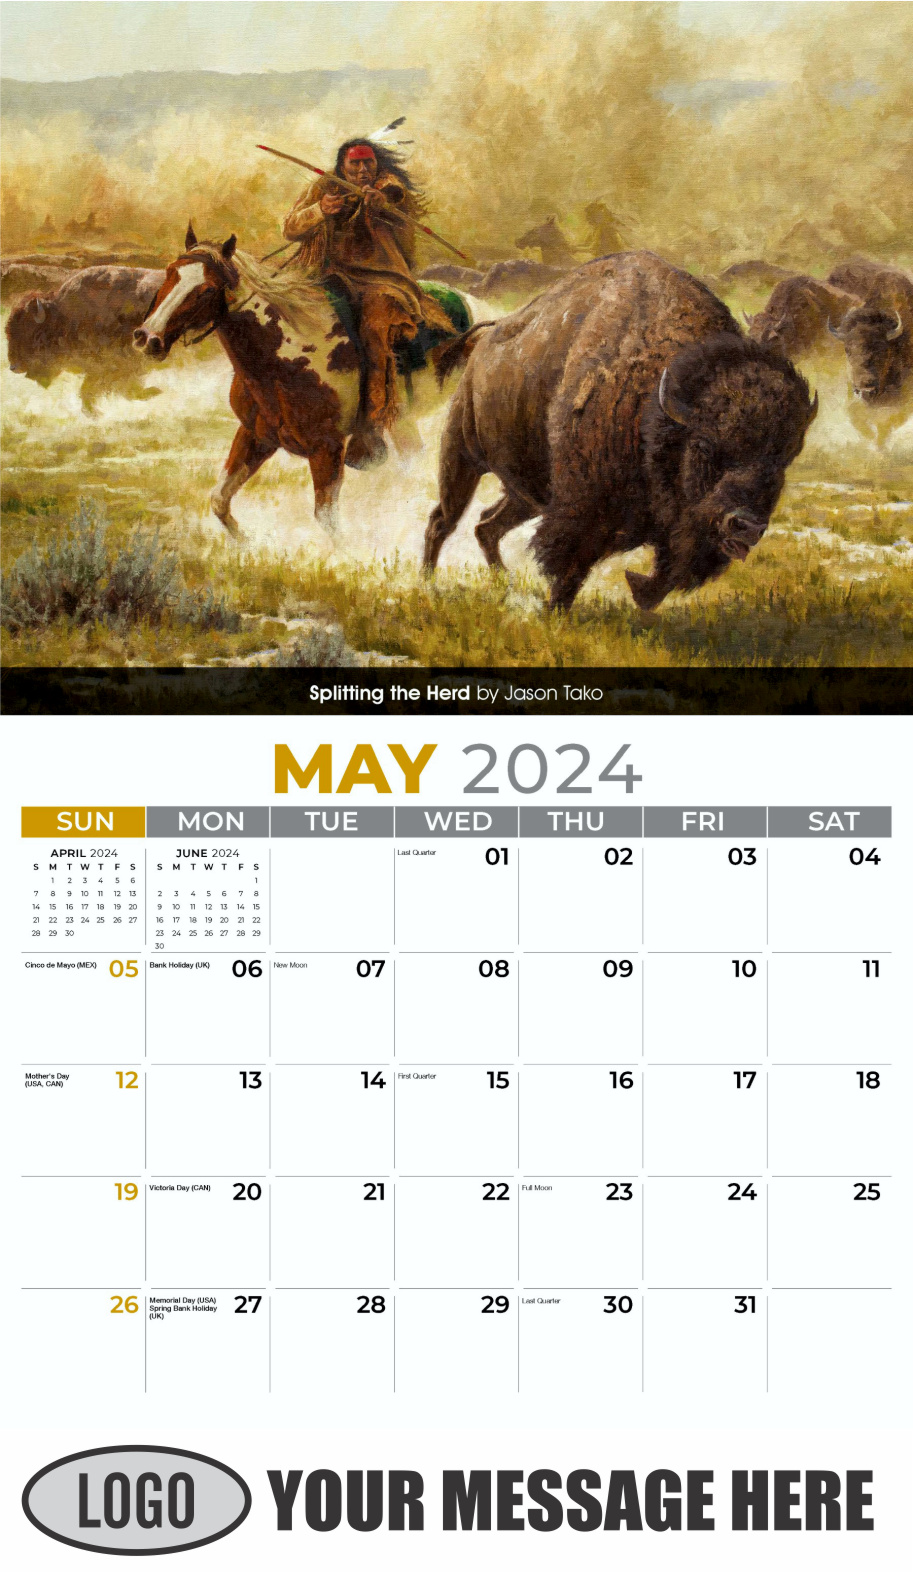 Spirit of the Old West 2024 Old West Art Business Promo Wall Calendar - May